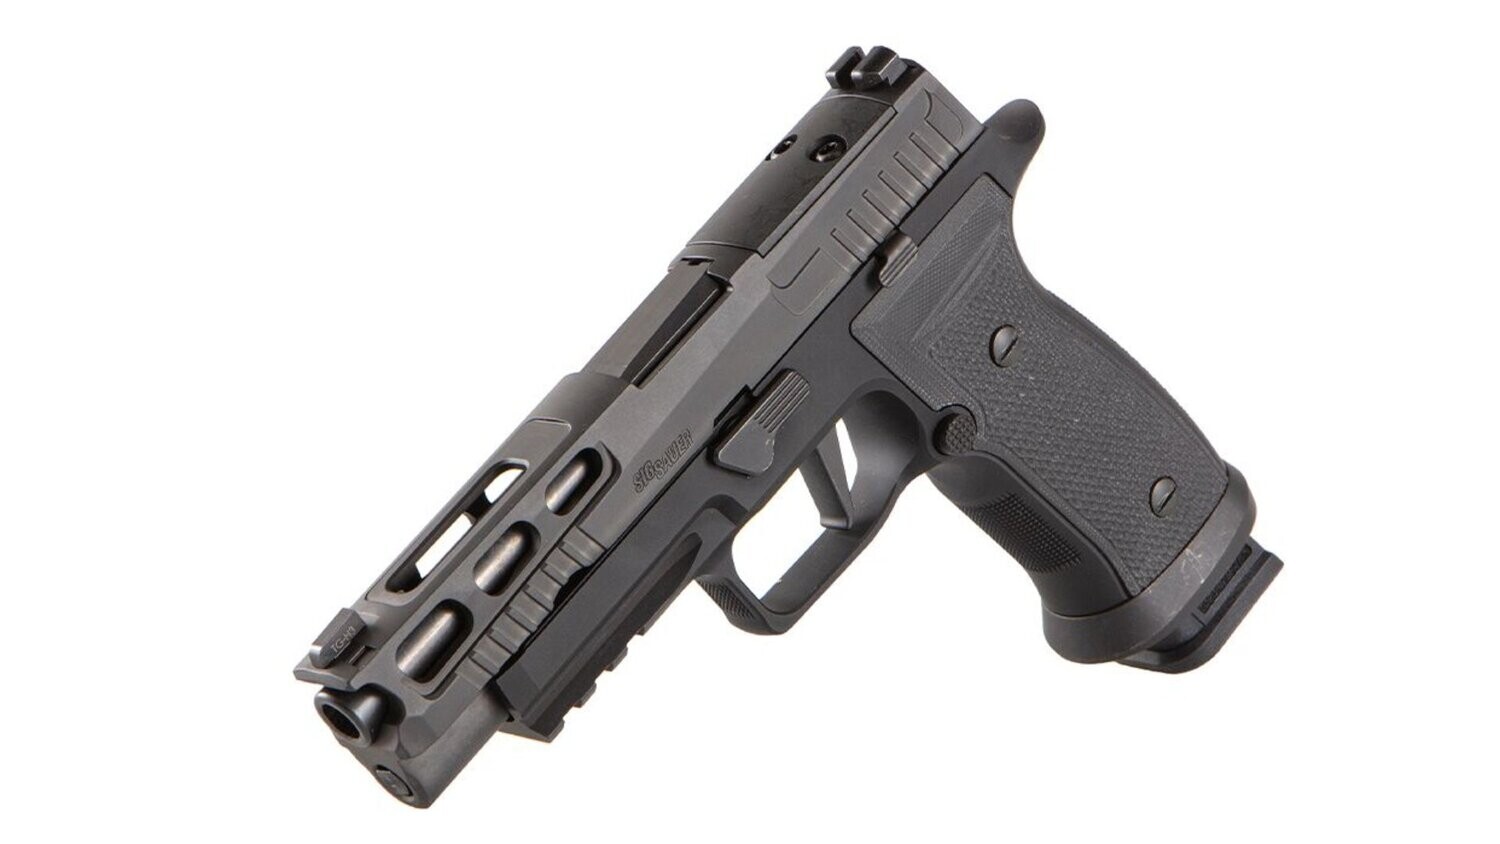 New: 80% SIG Sauer P320 AXG Pro Full Size Pistol Parts - 1 State Compliant Magazine